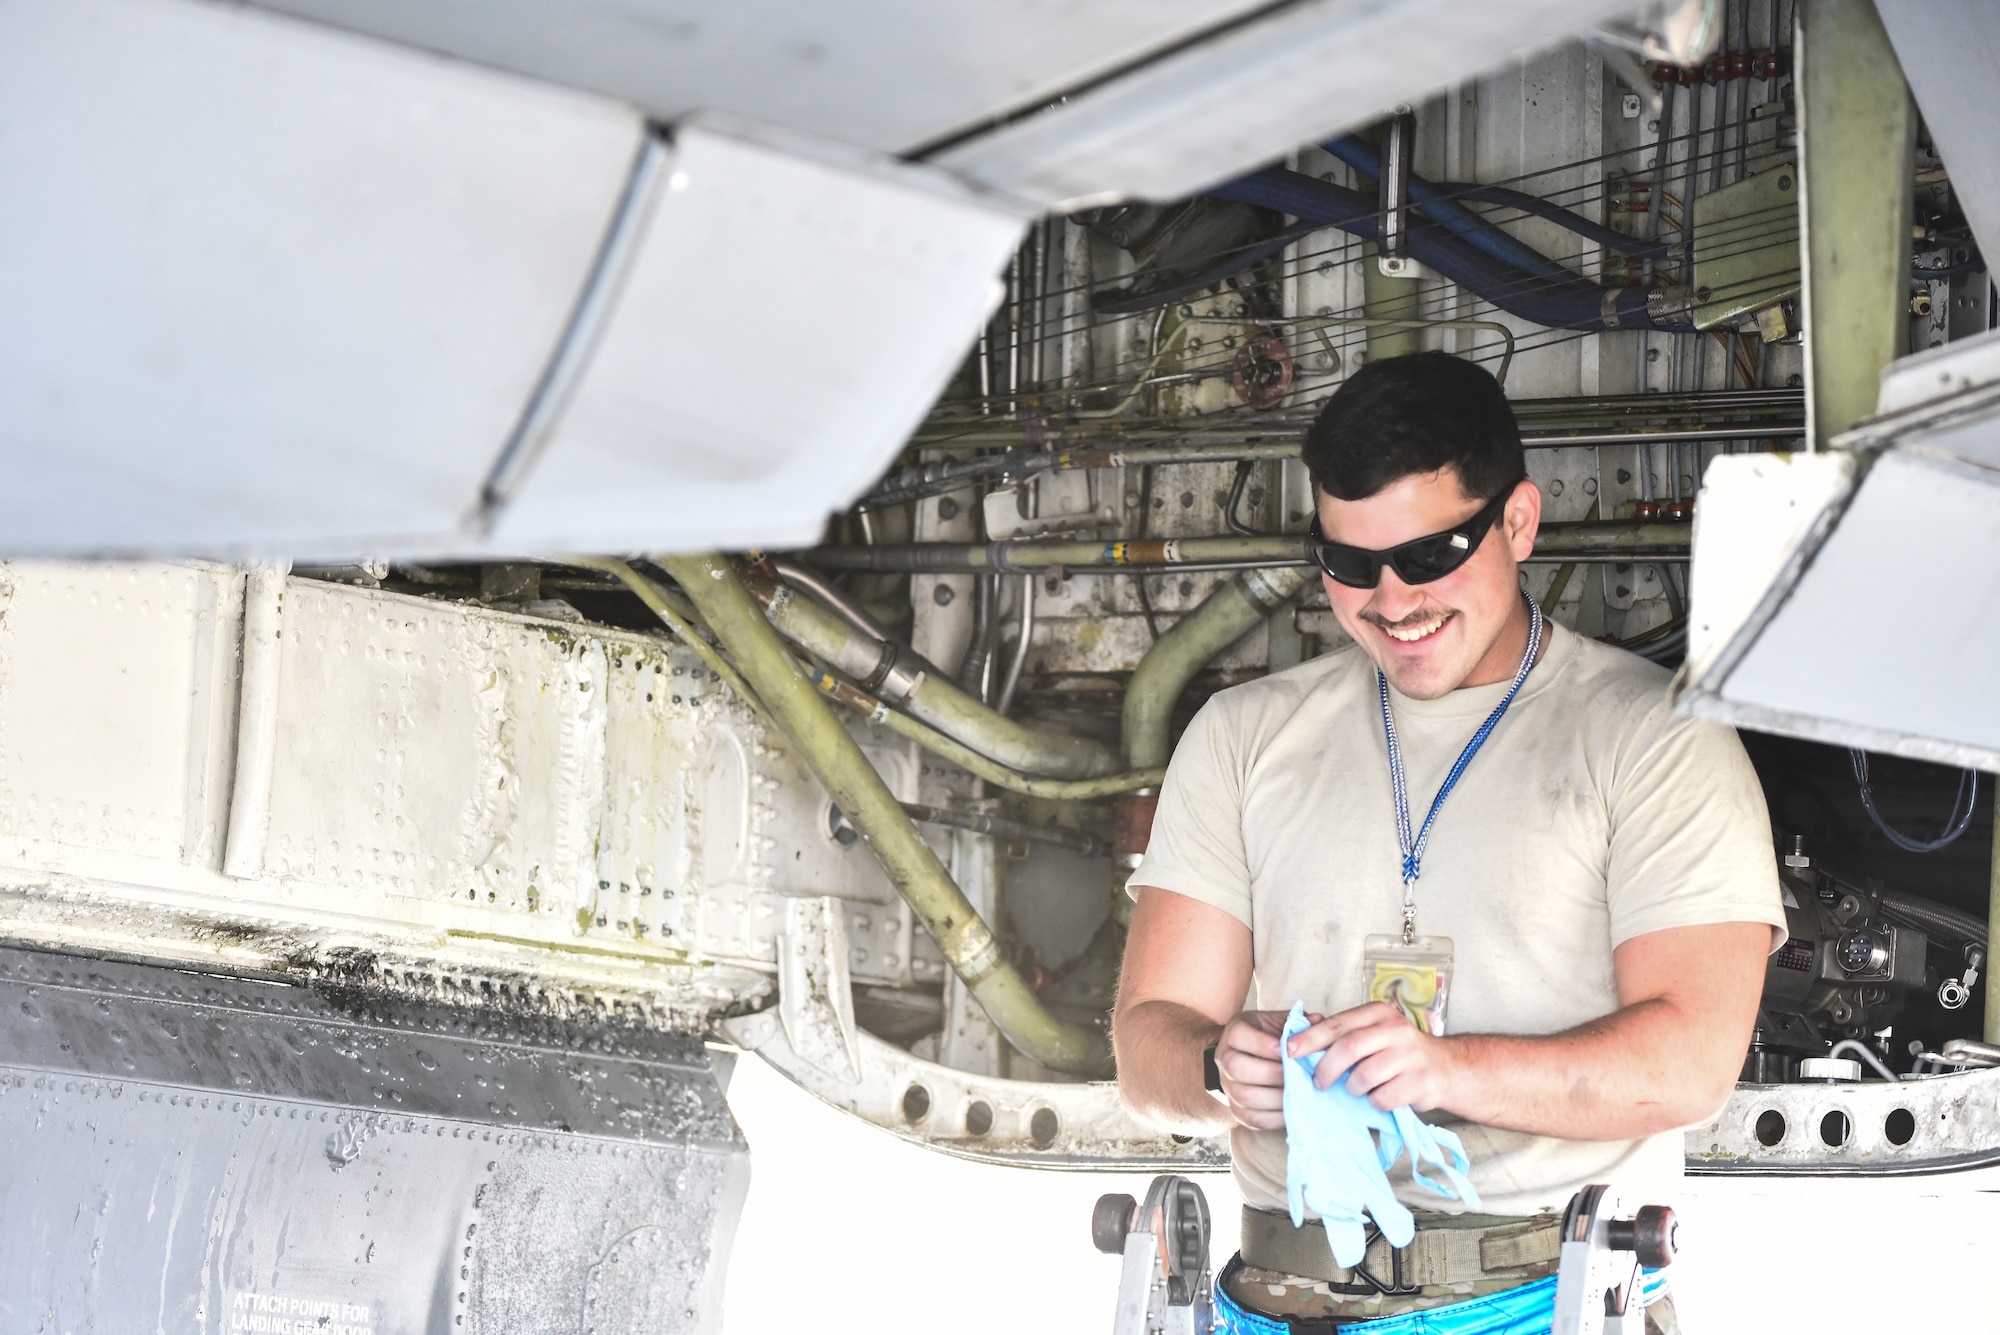 Senior Airman Brian Rizzolo, 380th Expeditionary Aircraft Maintenance Squadron hydraulic systems specialist, puts on gloves at Al Dhafra Air Base, United Arab Emirates, Mar. 5, 2019. Hydraulic systems specialists are responsible for maintaining fluid-, air- or gas-pressured devices on aircraft. (U.S. Air Force photo by Senior Airman Mya M. Crosby)